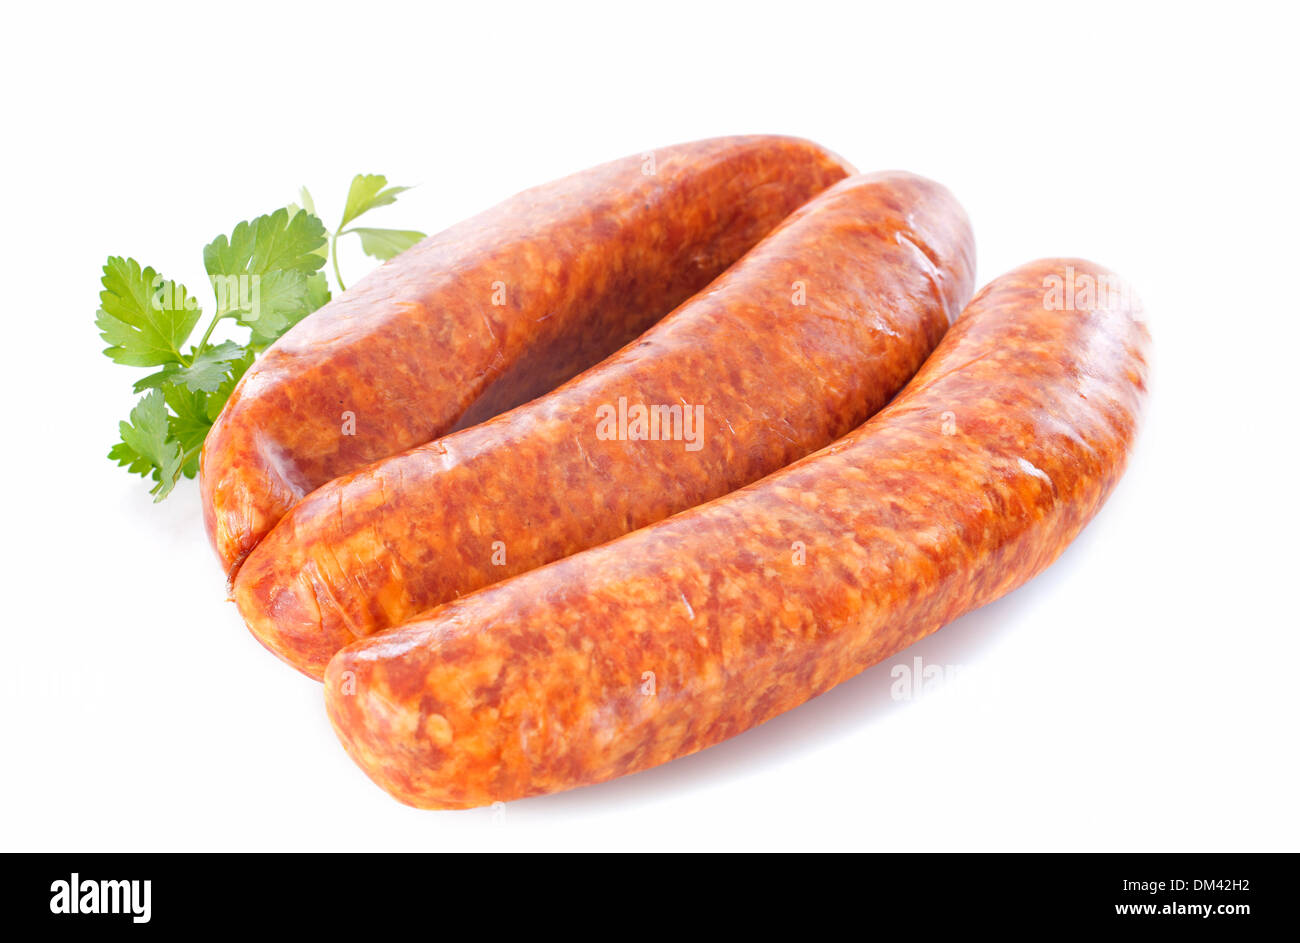 Montbeliard sausages in front of white background Stock Photo